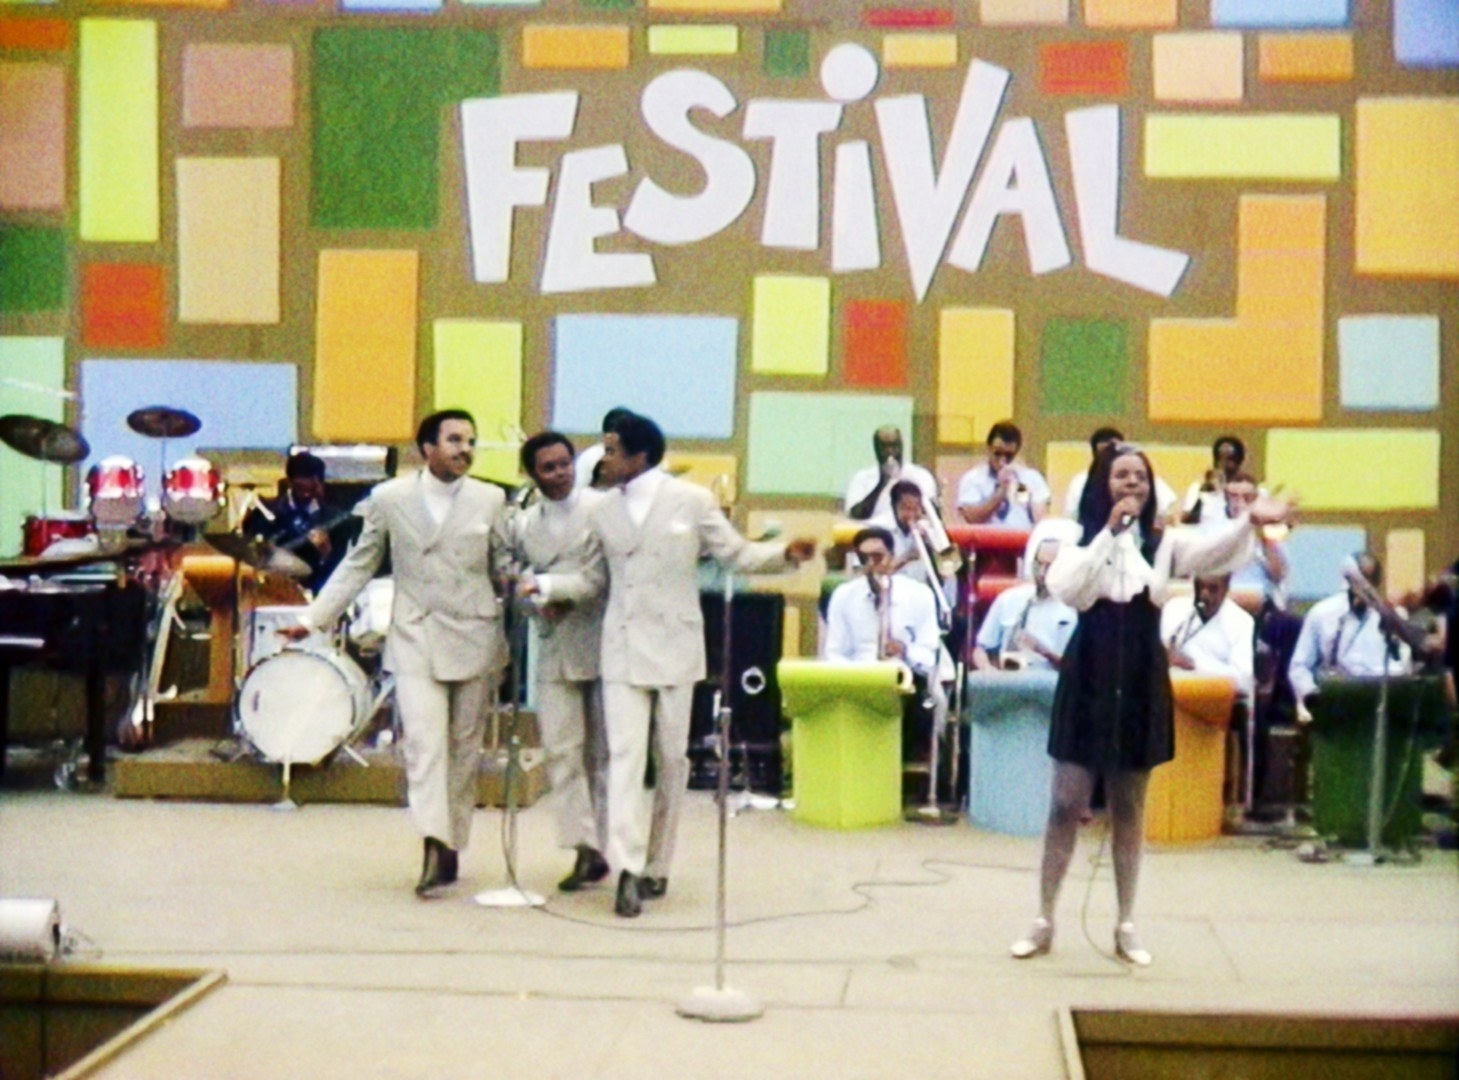 Gladys Knight and the Pips performing at the Harlem Cultural Festival in 1969